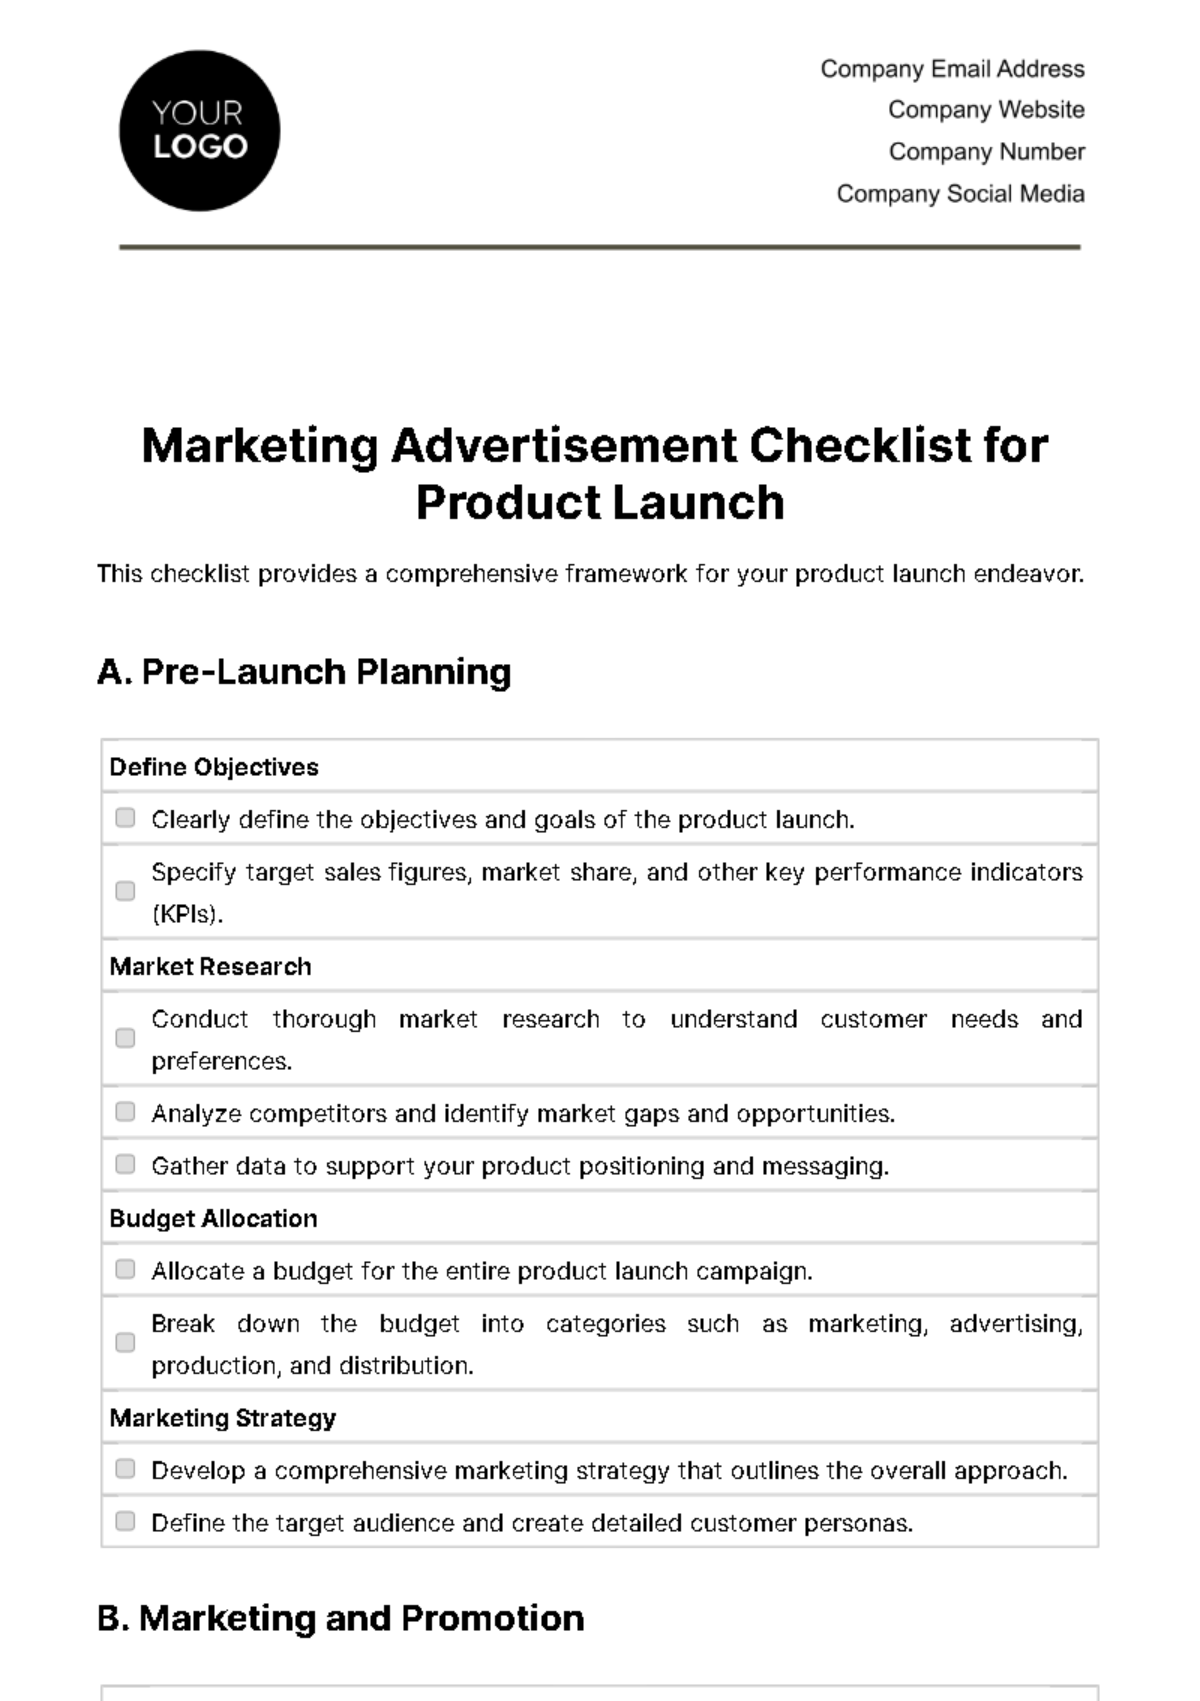 Free Marketing Advertisement Checklist for Product Launch Template